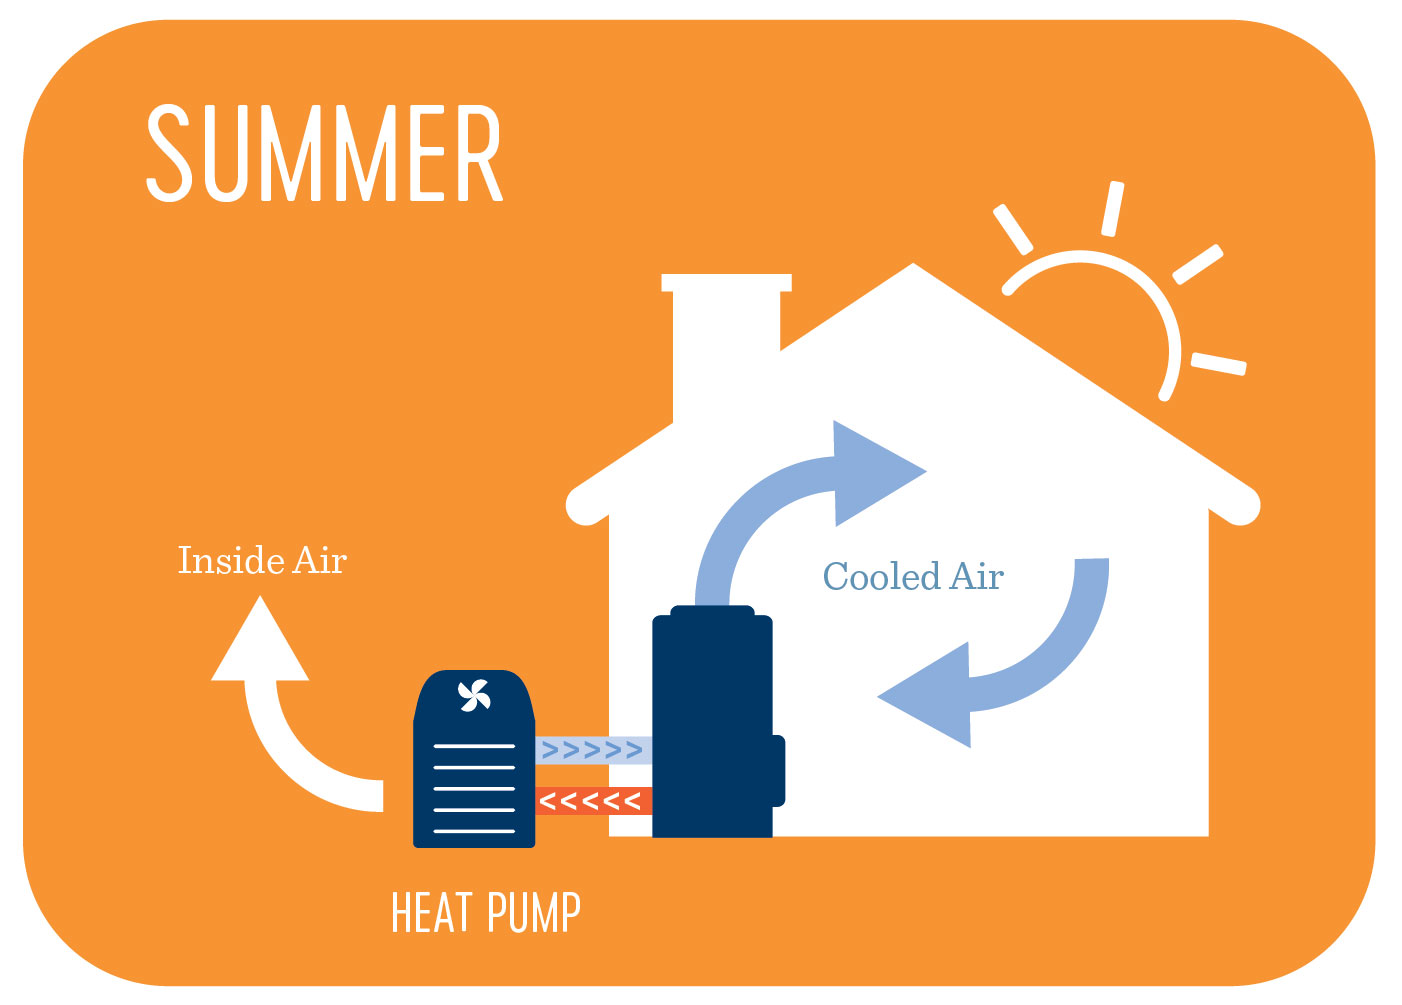 central air conditioning with a heat pump illustration